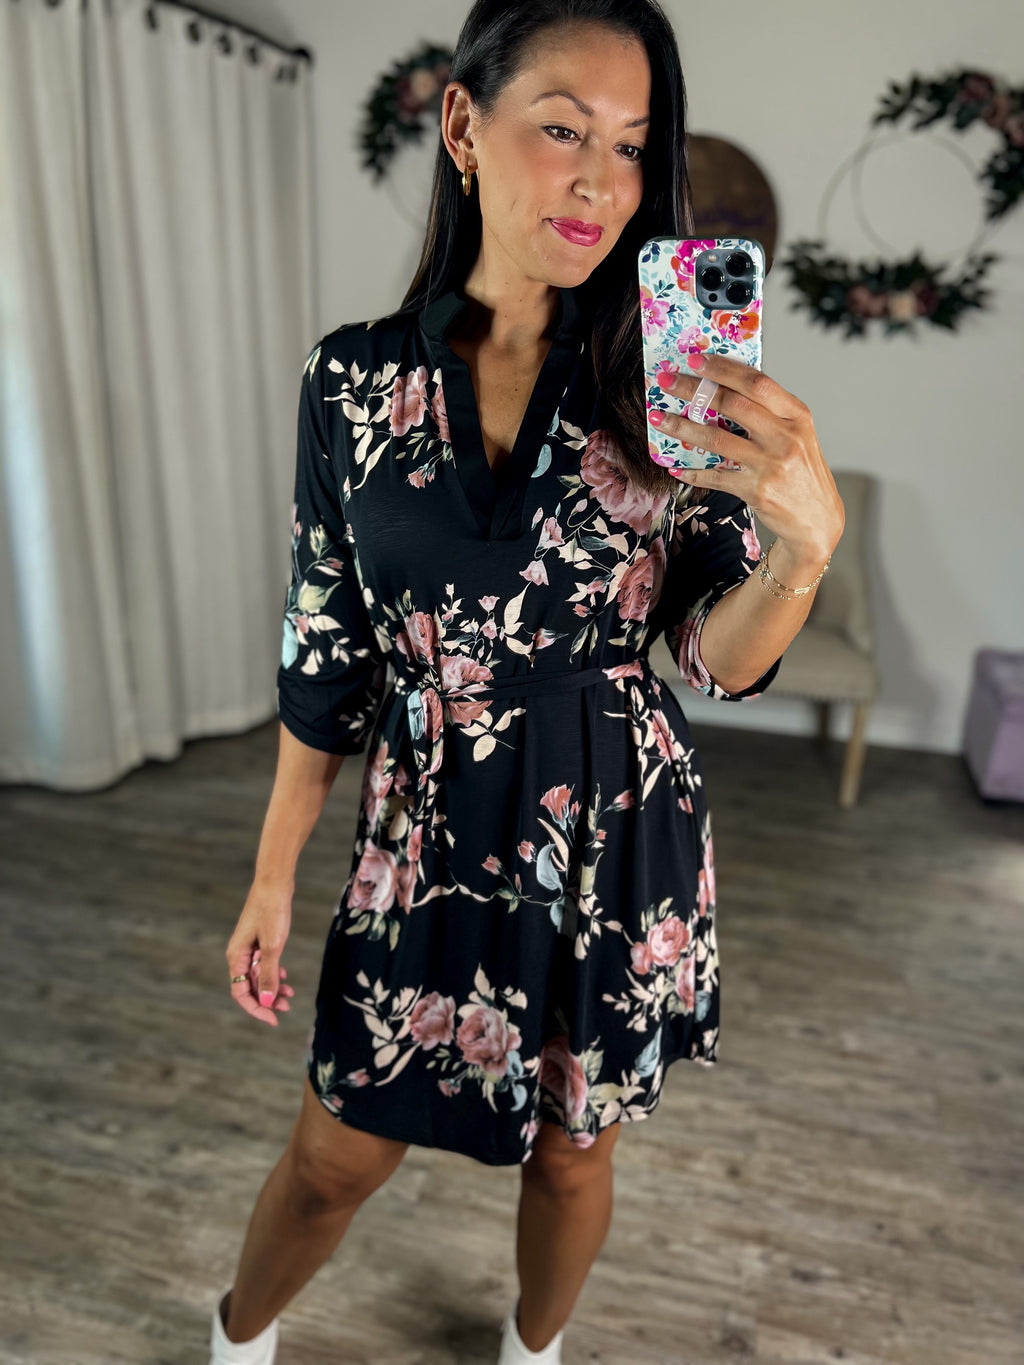 Sophisticated in Floral Dress